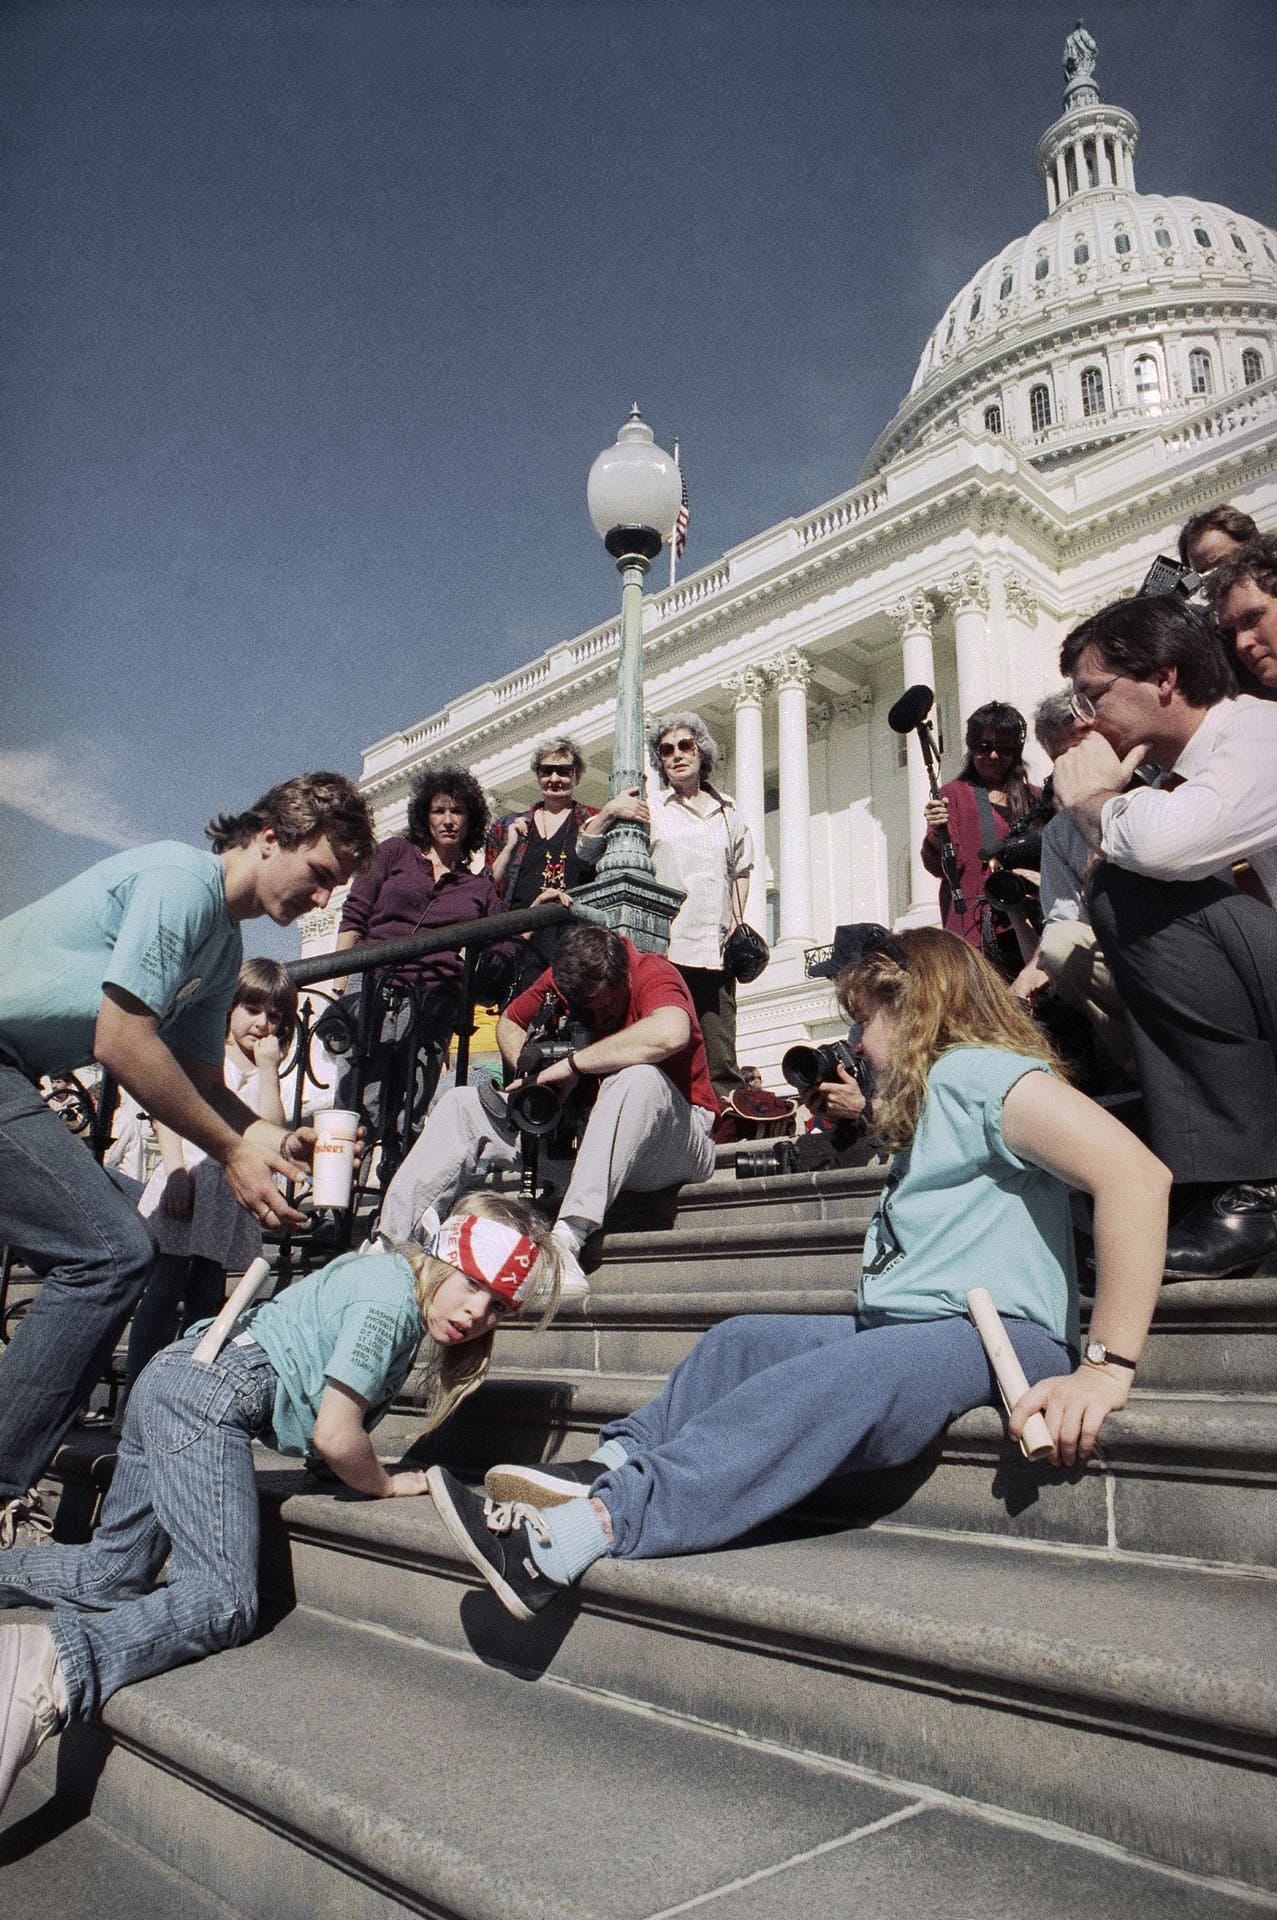 US Capitol building staicase, a young girl crawling up the stairs on her belly, surrounded by supporters and journalists taking photos and filming her, watched over by some passerby ladies in sunglasses.